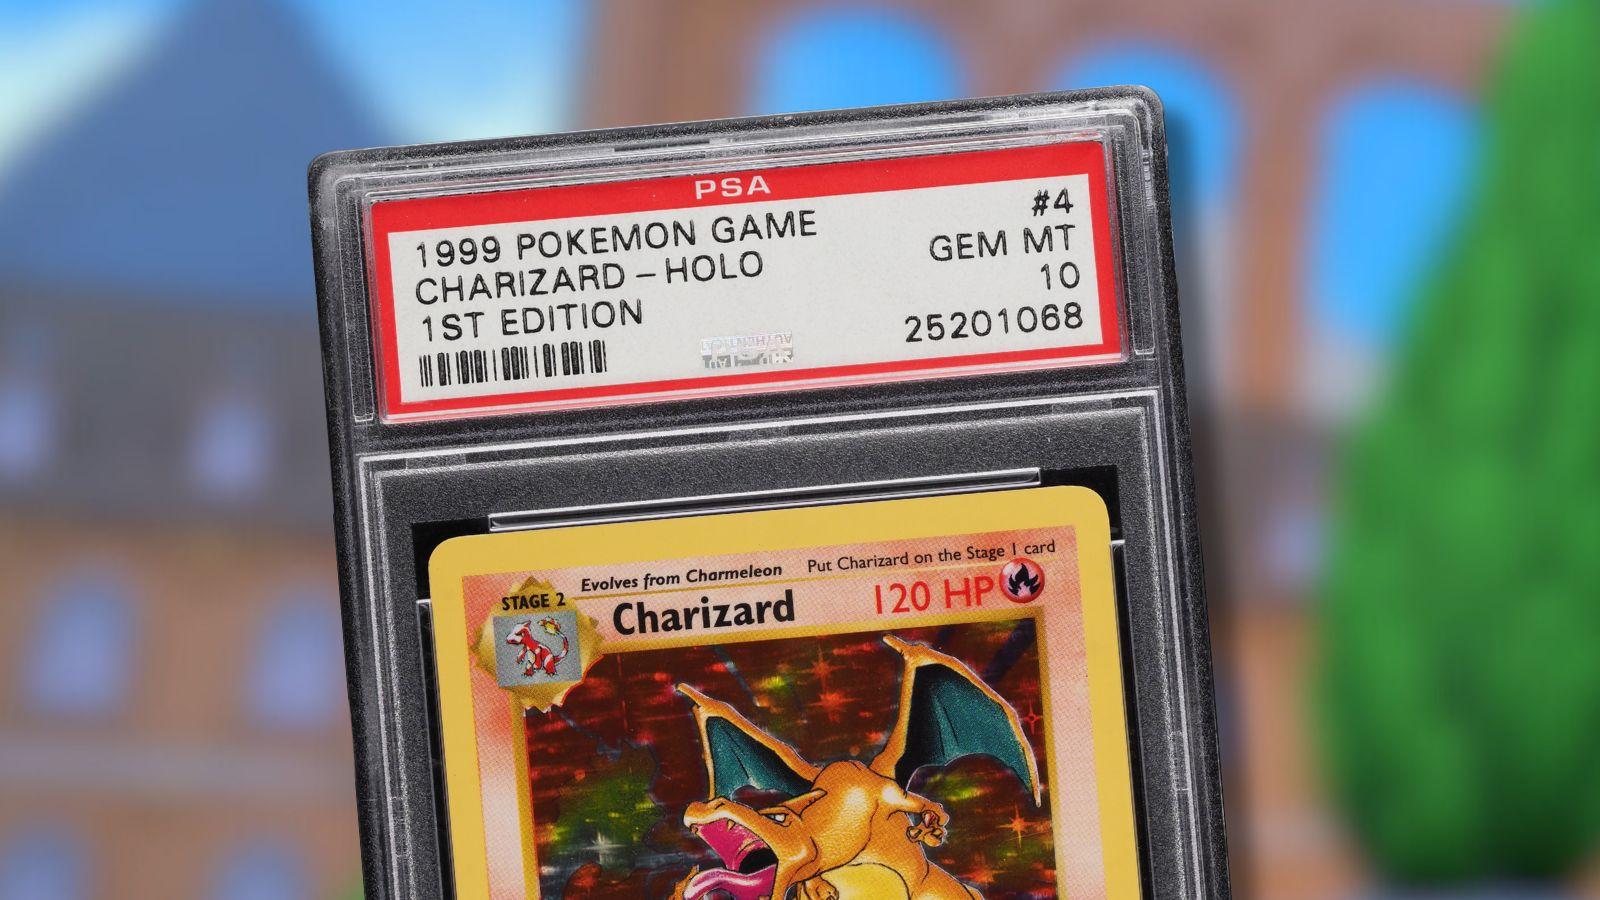 Graded Charizard Pokemon card with game background.